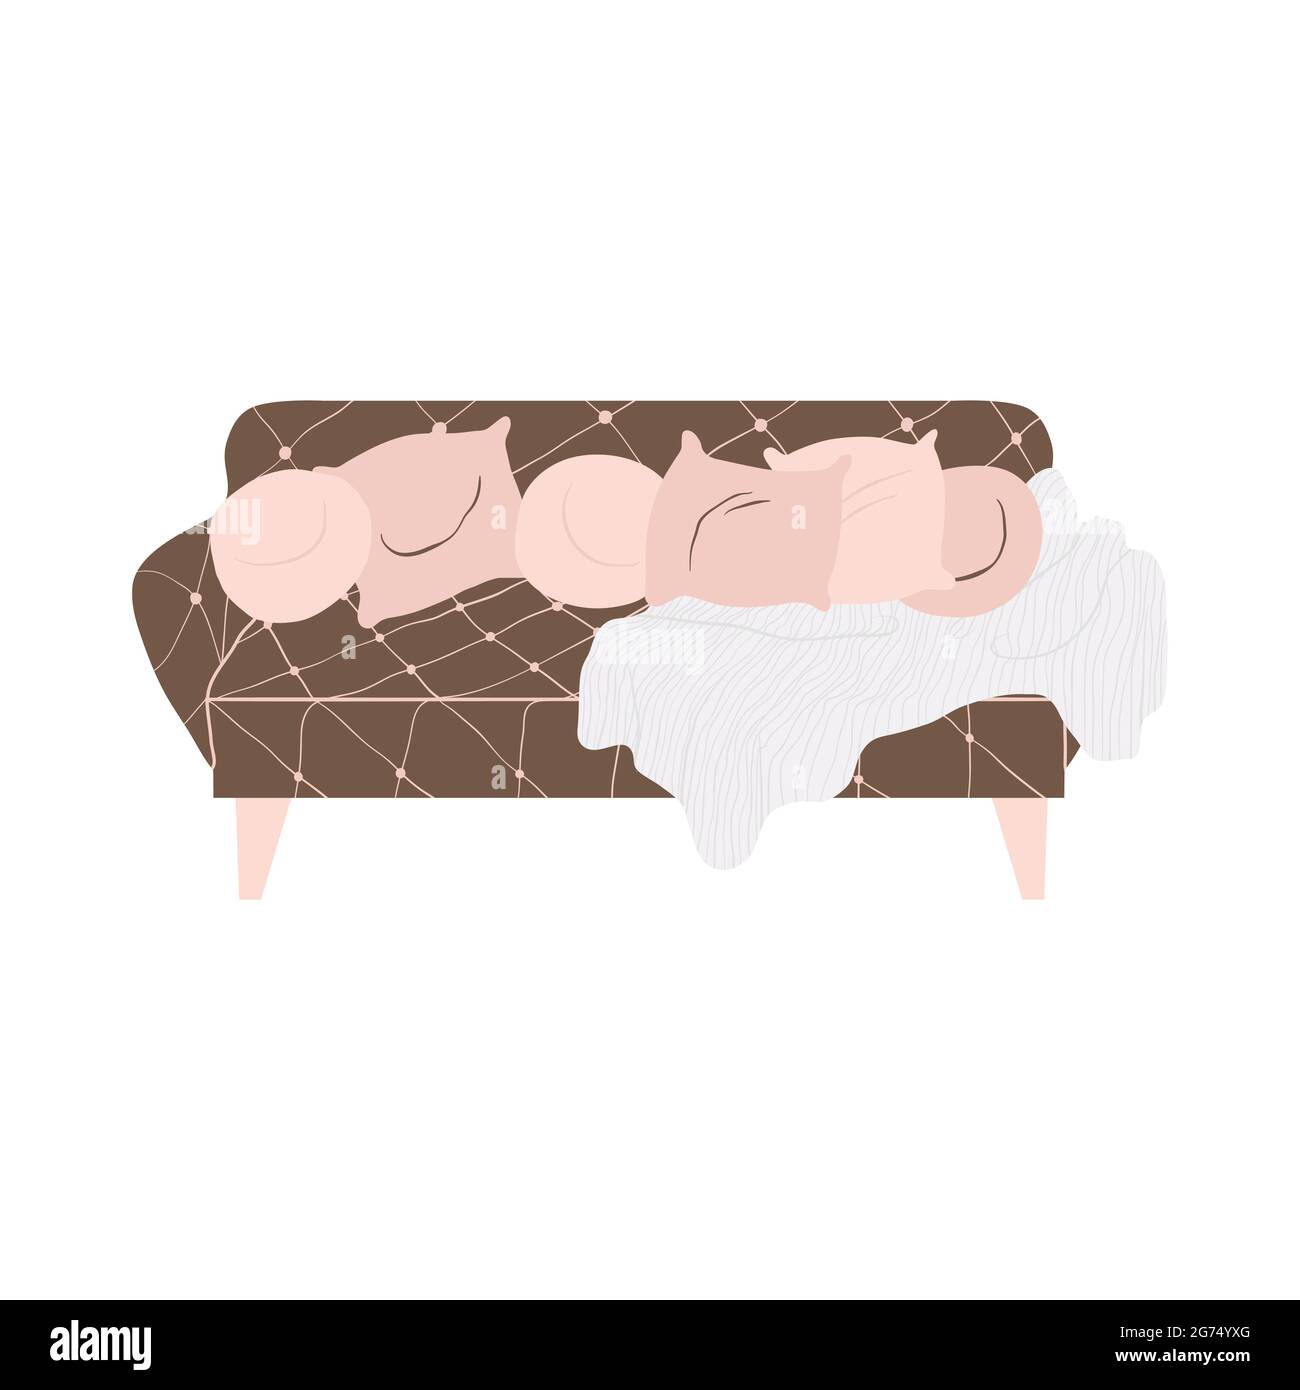 Furniture - sofa with decorative pillows in beige and white colors. Clip art in cartoon style. Single object isolated on grey background. Stock Vector